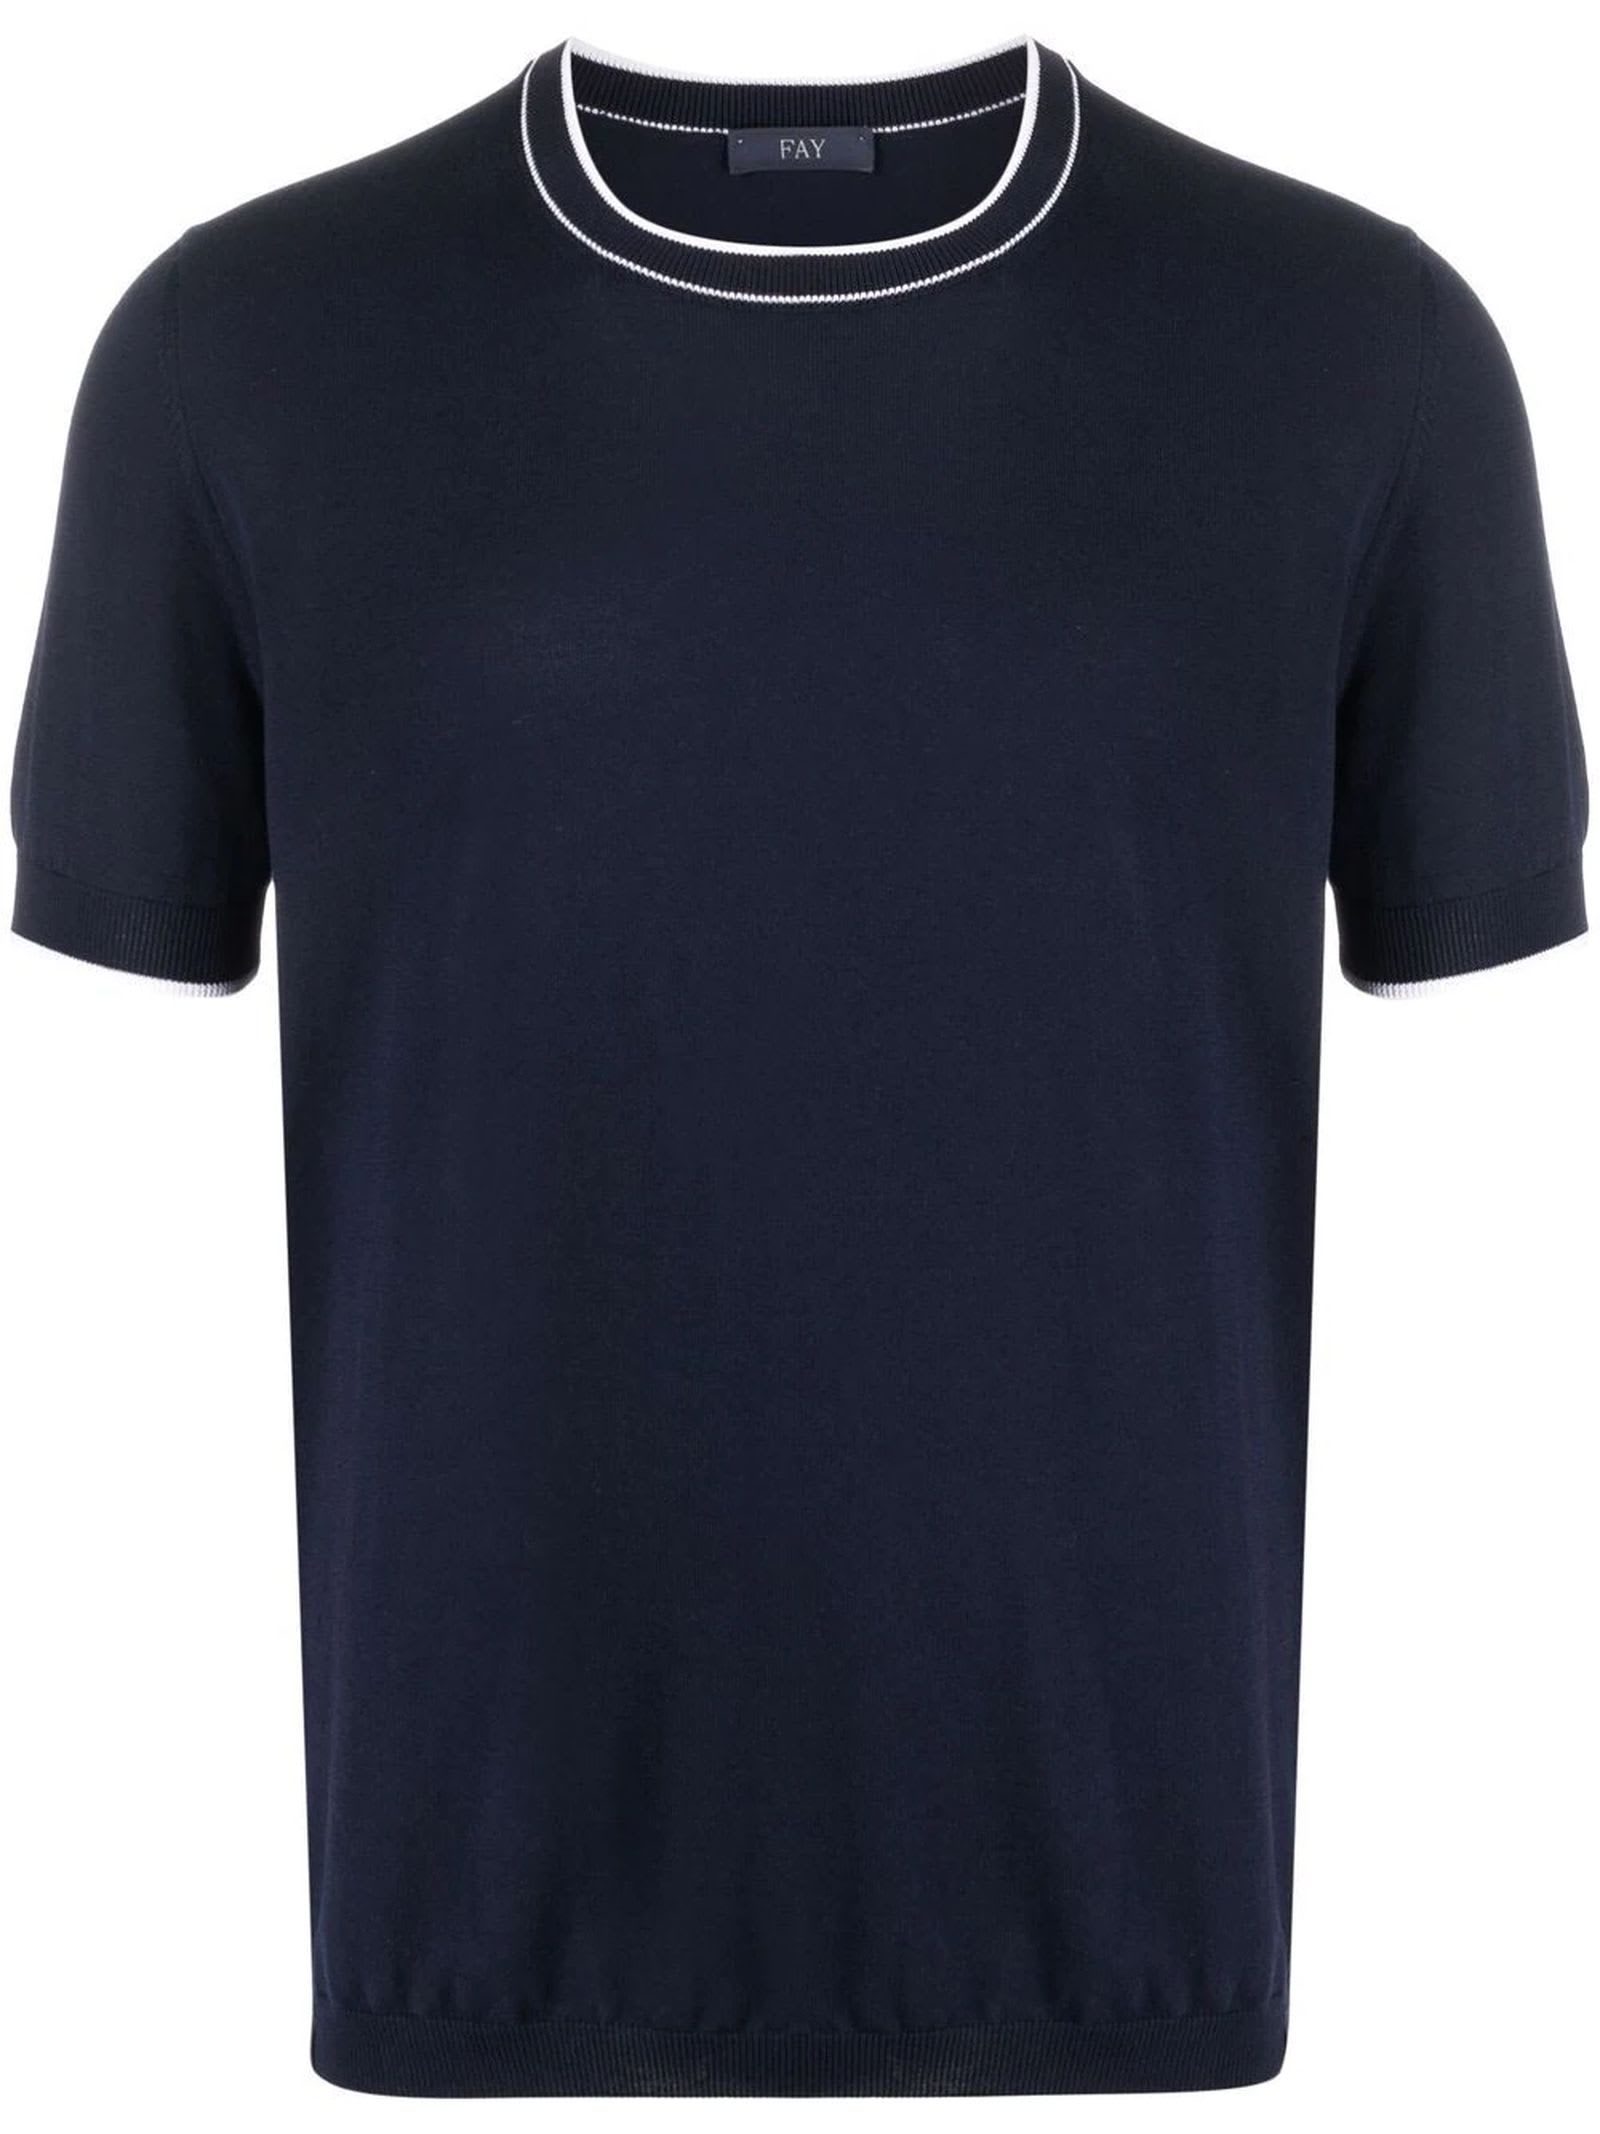 Fay T-shirt In Blue Cotton Knit